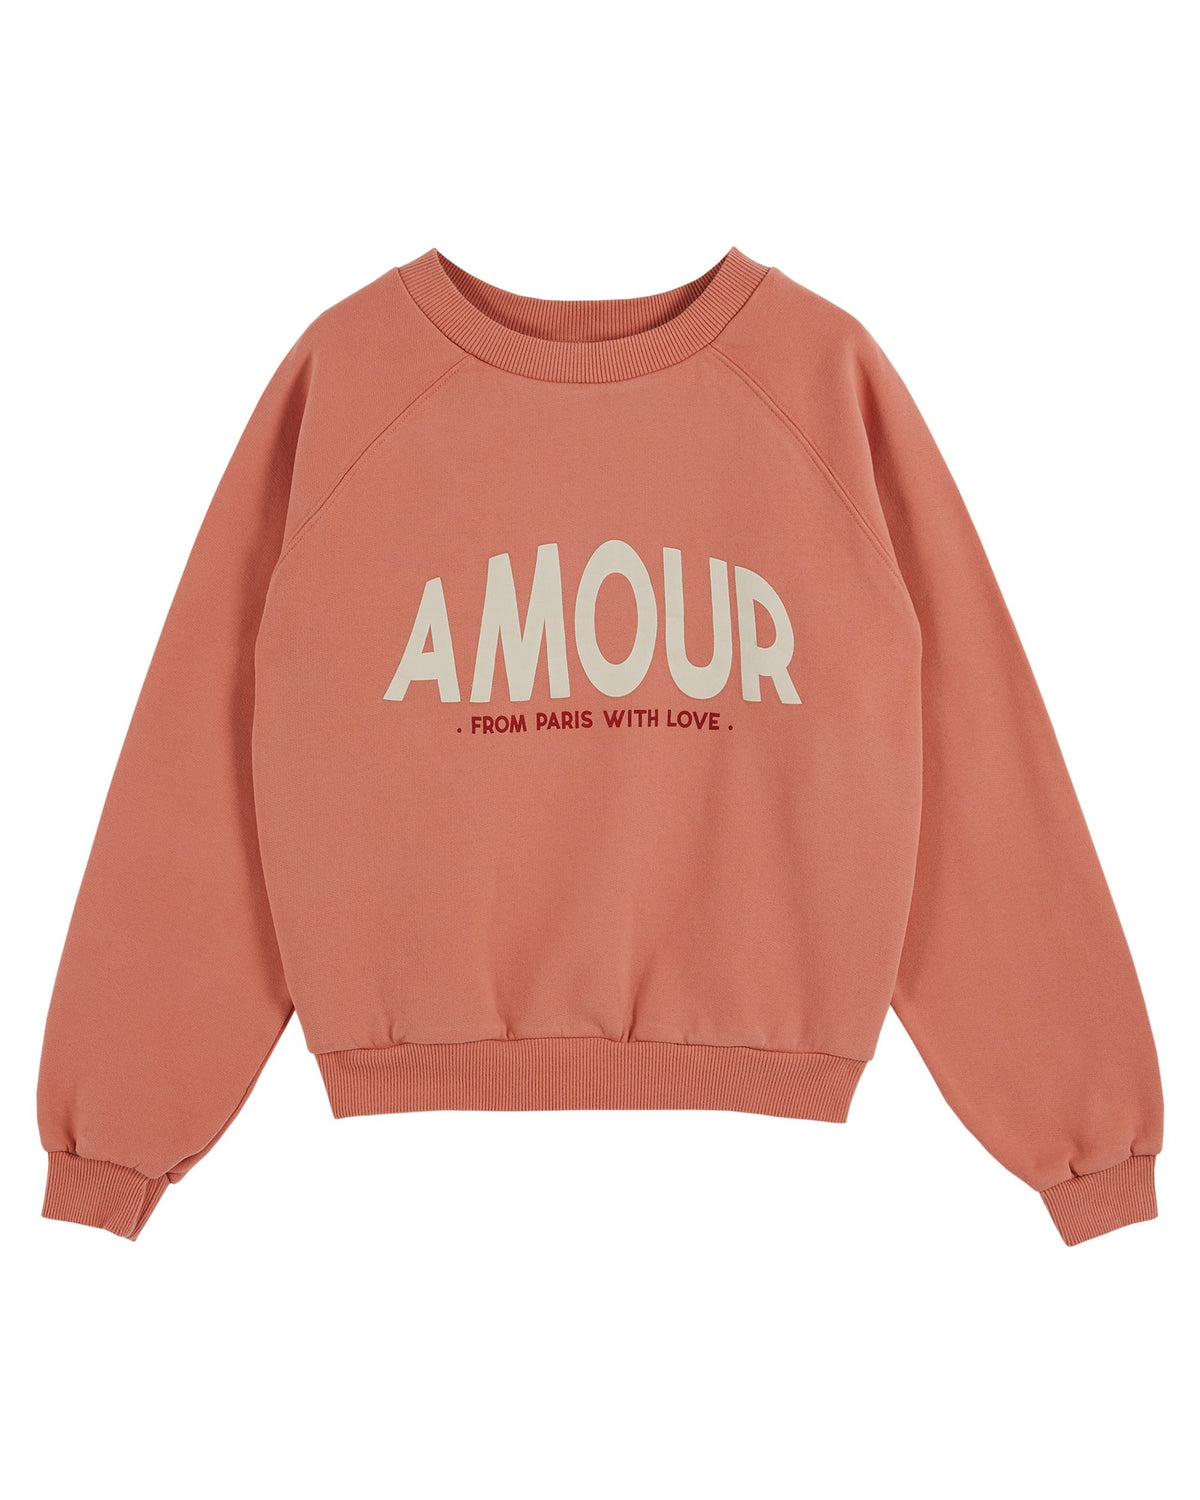 Terracotta coloured scoop neck sweatshirt with raglan sleeves and "amour" logo on the centre front